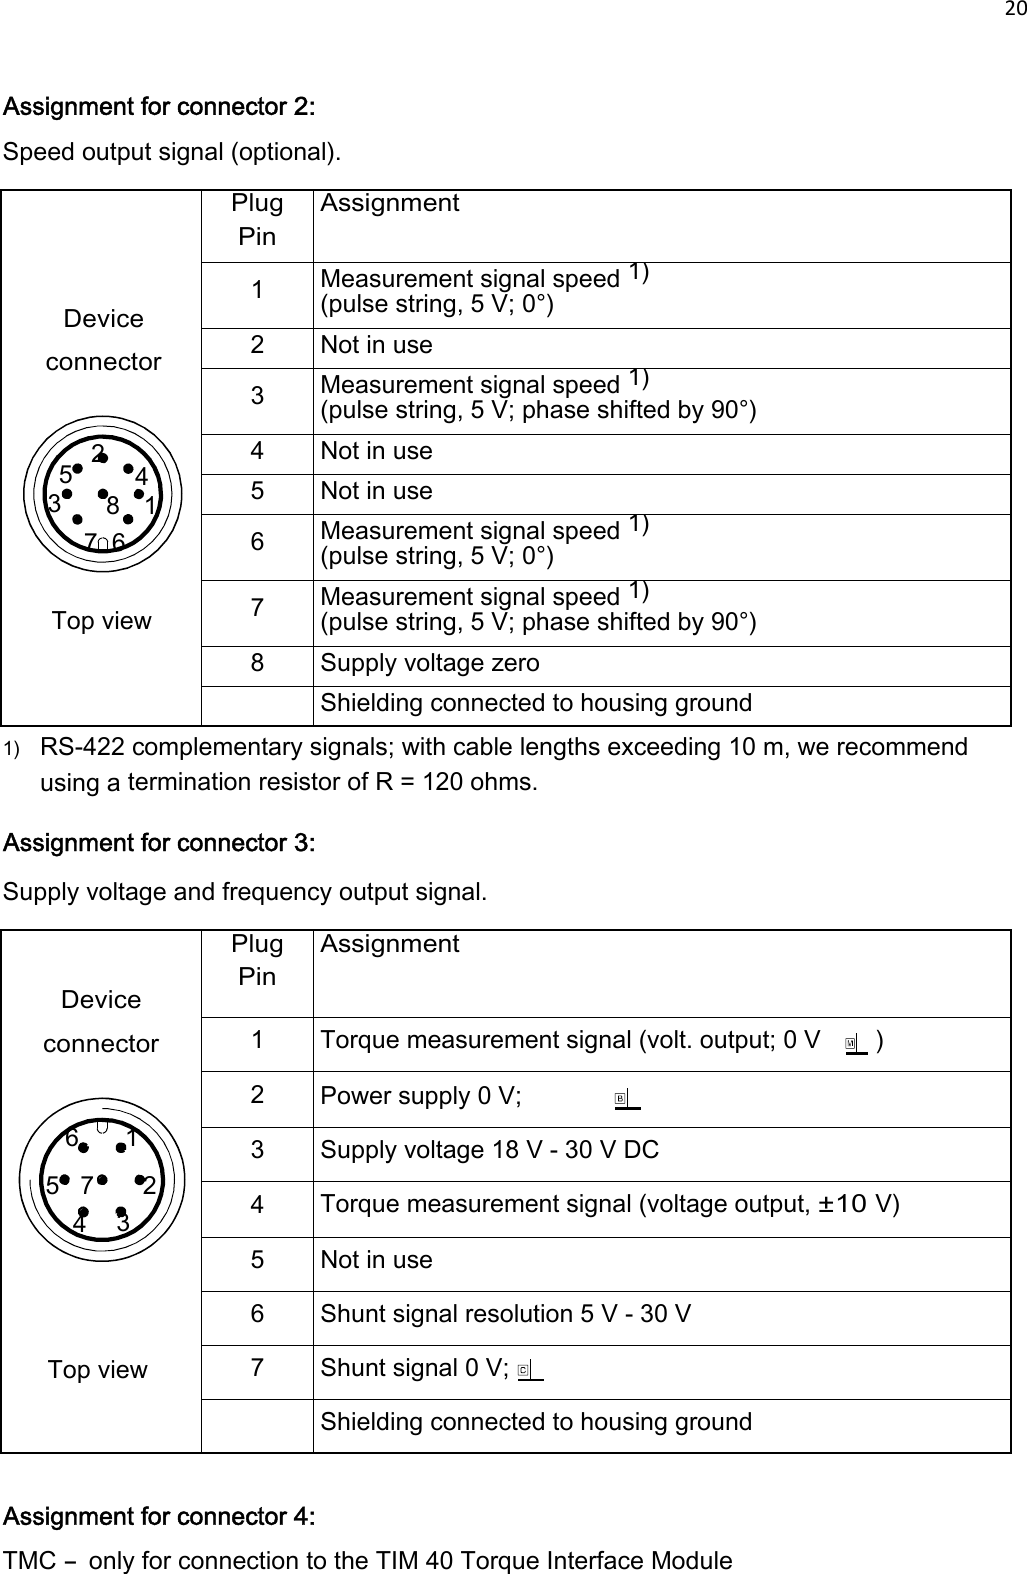 20     Assignment for connector 2: Speed output signal (optional).       Device connector   2 5 4 3  8  1 7  6   Top view Plug Pin Assignment 1 Measurement signal speed 1) (pulse string, 5 V; 0°) 2 Not in use 3 Measurement signal speed 1) (pulse string, 5 V; phase shifted by 90°) 4 Not in use 5 Not in use 6 Measurement signal speed 1) (pulse string, 5 V; 0°) 7 Measurement signal speed 1) (pulse string, 5 V; phase shifted by 90°) 8 Supply voltage zero  Shielding connected to housing ground 1) RS-422 complementary signals; with cable lengths exceeding 10 m, we recommend using a termination resistor of R = 120 ohms.  Assignment for connector 3: Supply voltage and frequency output signal.    Device connector   6  1 5  7  2 4  3      Top view Plug Pin Assignment 1 Torque measurement signal (volt. output; 0 V ) 2 Power supply 0 V; 3 Supply voltage 18 V - 30 V DC 4 Torque measurement signal (voltage output, ±10 V) 5 Not in use 6 Shunt signal resolution 5 V - 30 V 7 Shunt signal 0 V;  Shielding connected to housing ground   Assignment for connector 4: TMC - only for connection to the TIM 40 Torque Interface Module